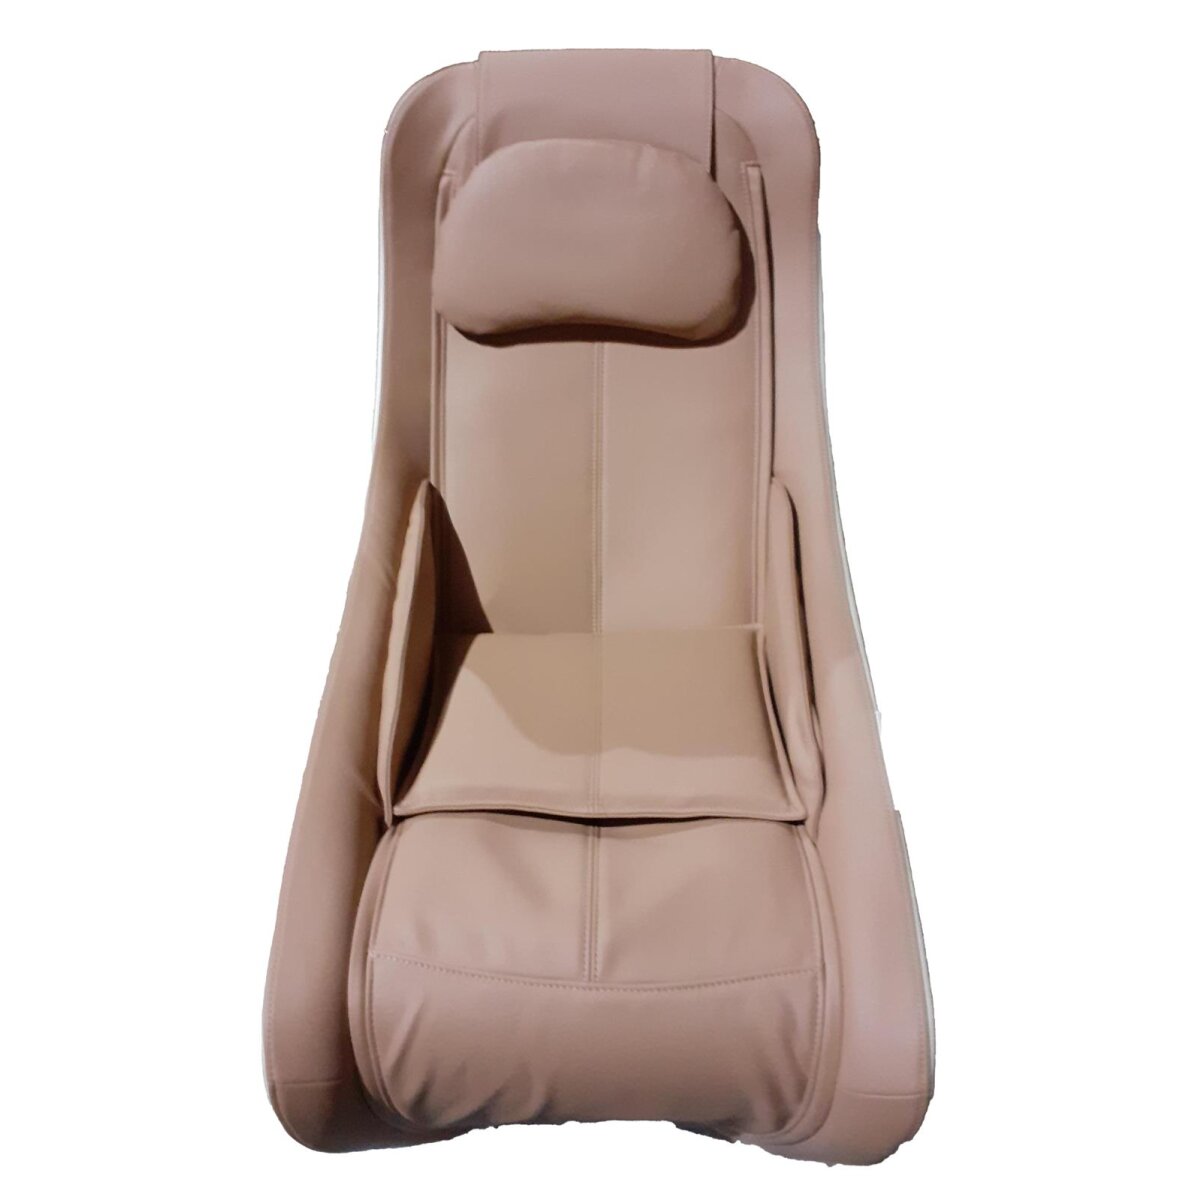 Synca CirC Compact Massagesessel Beige - B-Ware sehr gut, 592,99 €